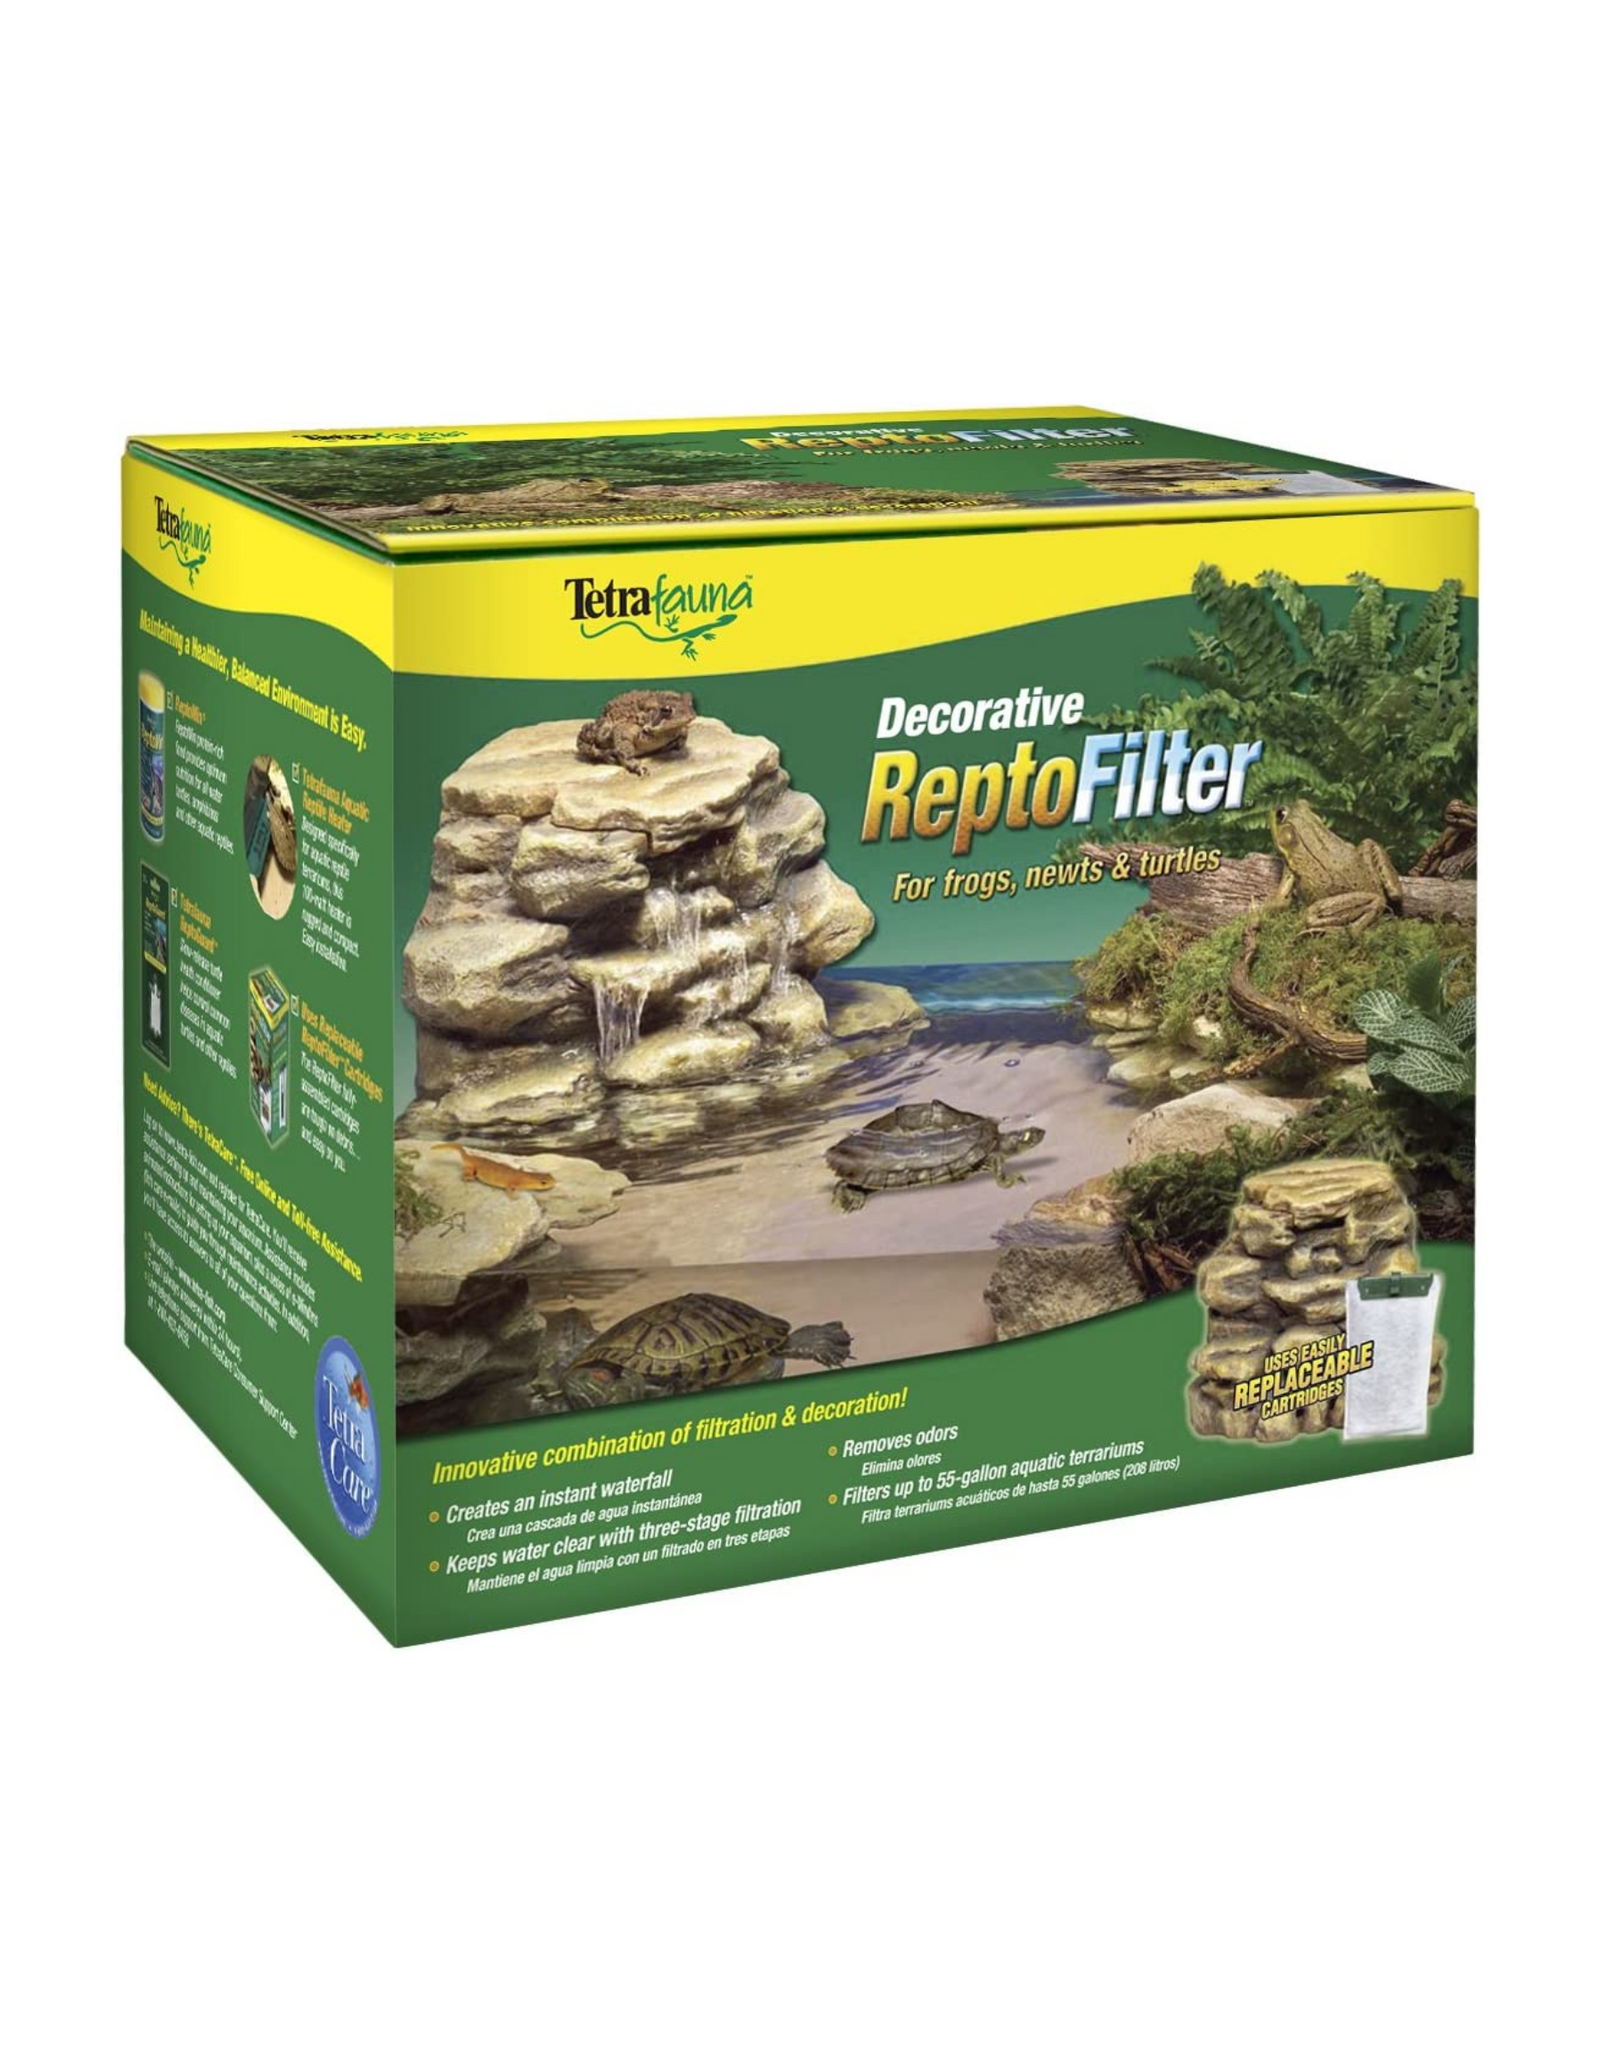 Tetra Decorative ReptoFilter, Terrarium Filtration, Keeps Water Clear, For Frogs, Newts & Turtles